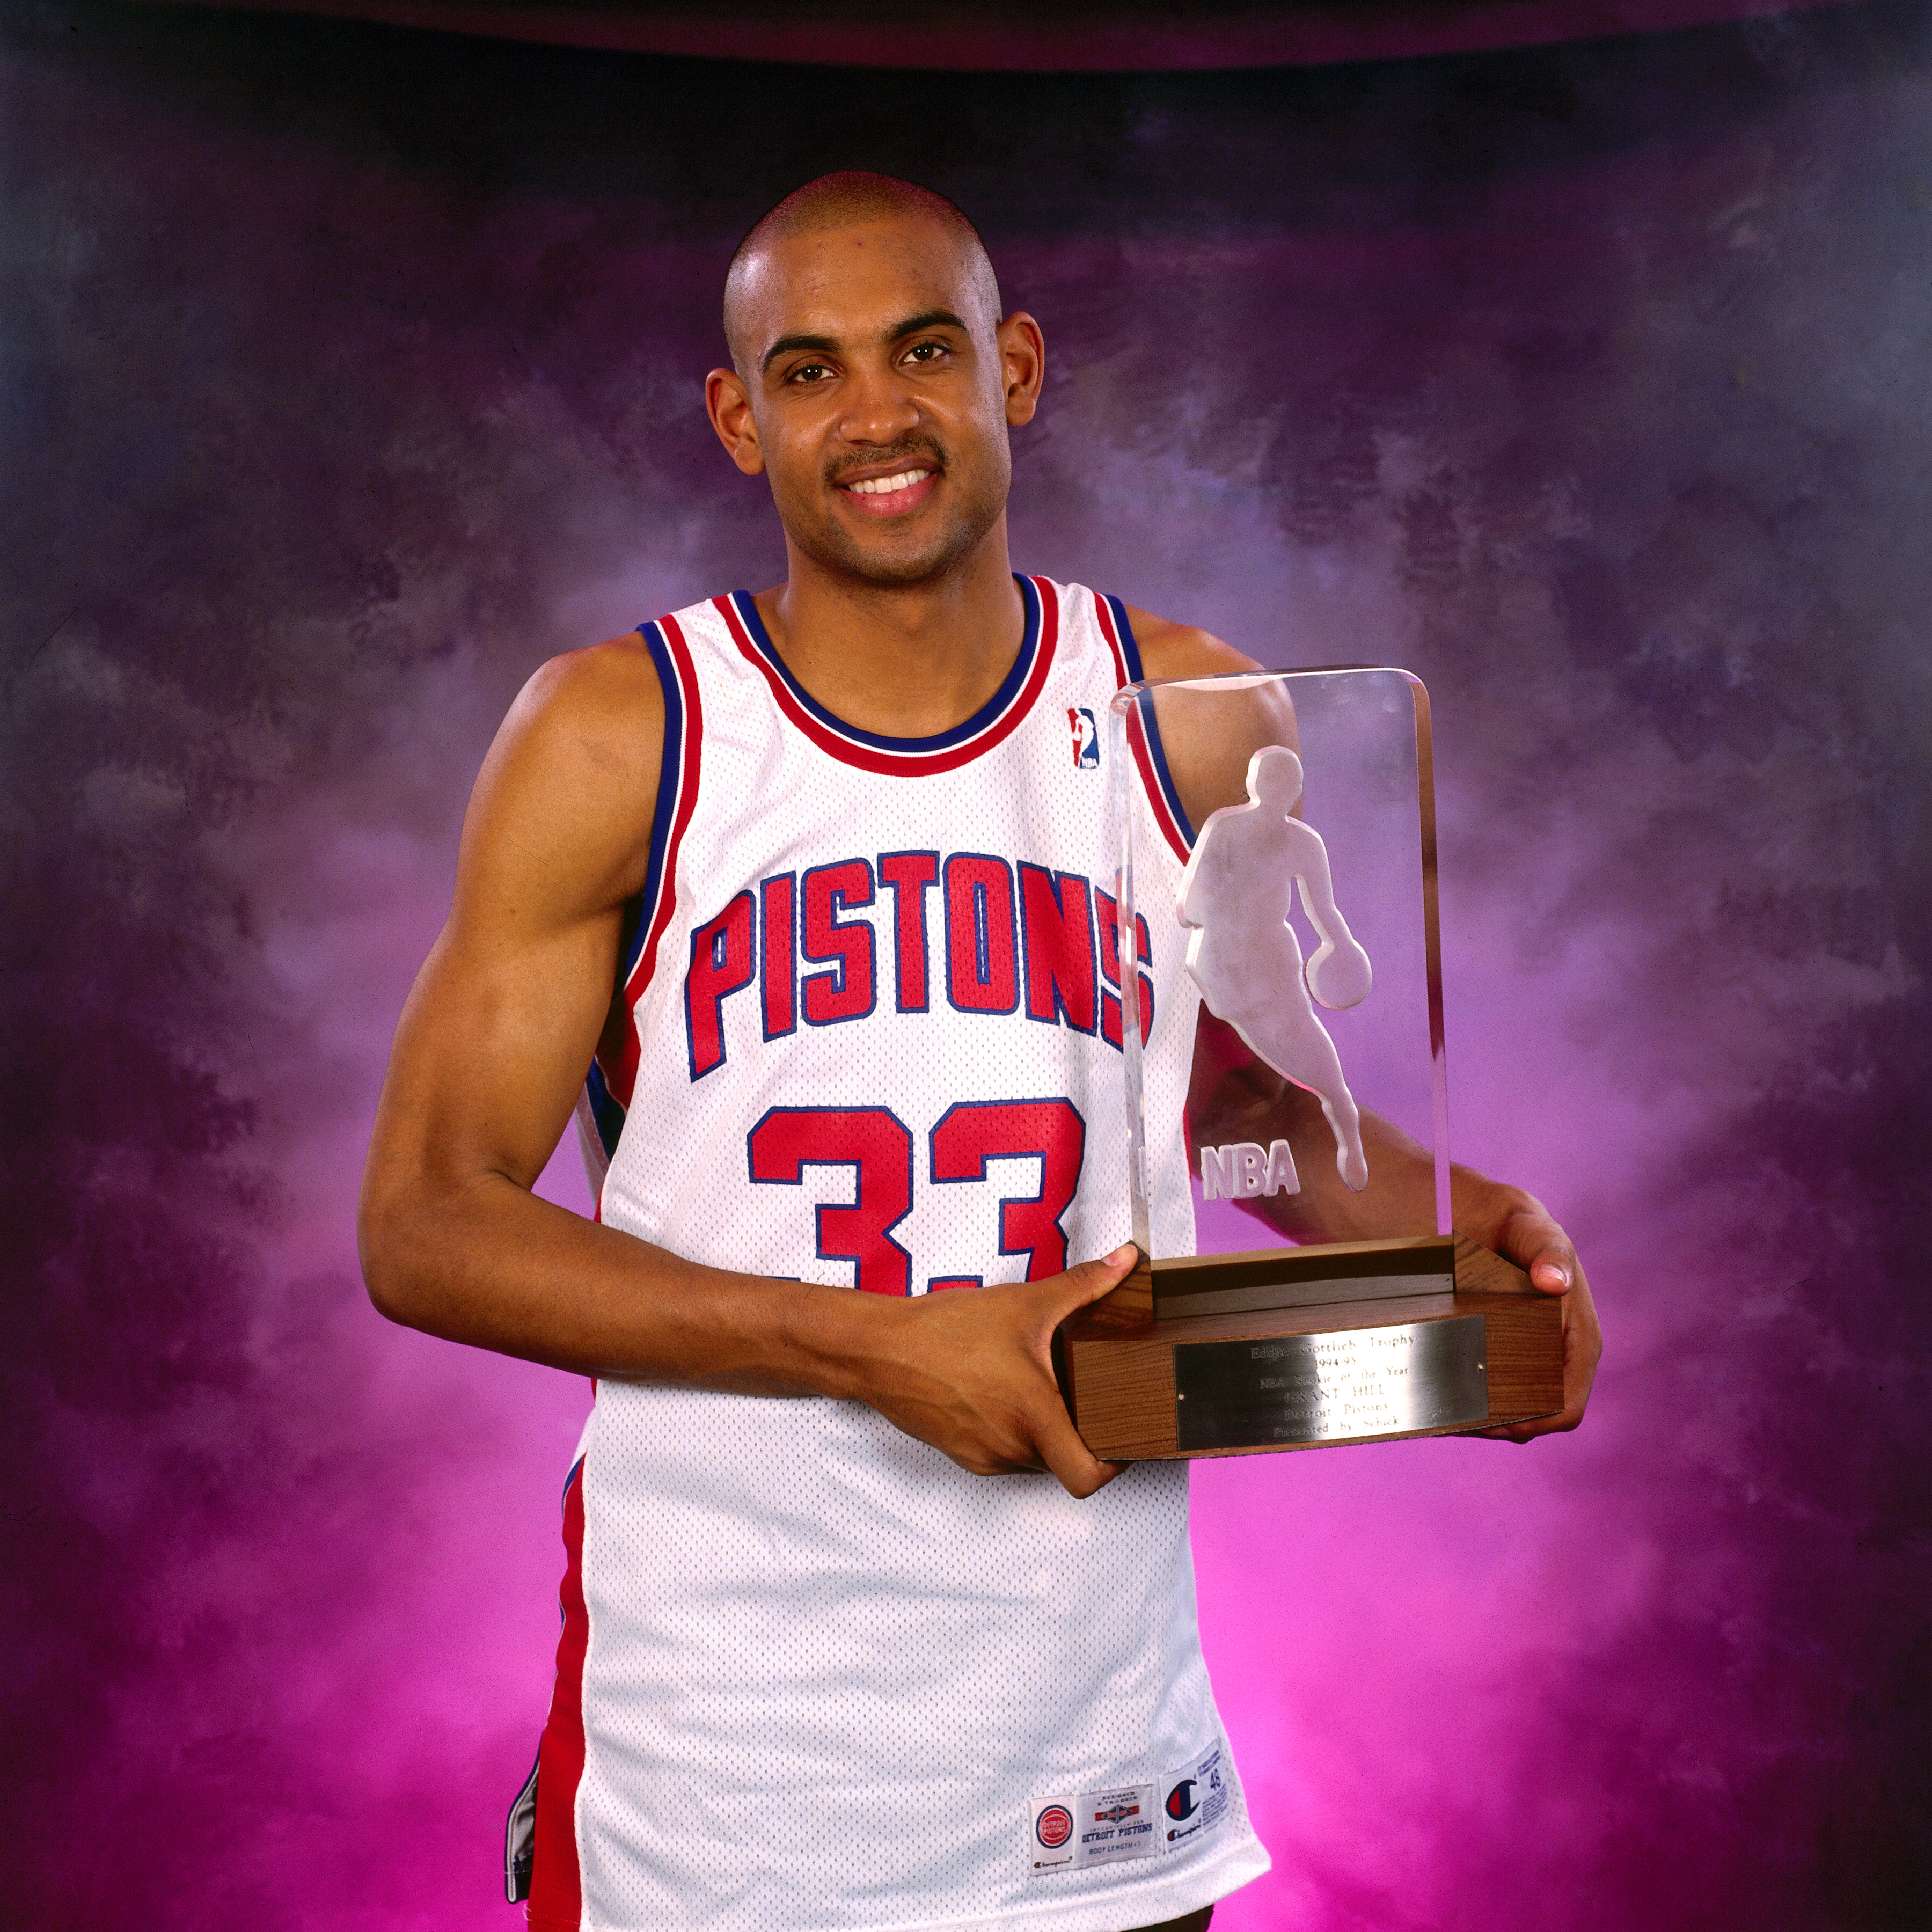 Grant Hill reflects on Pistons tenure, disdain for teal and